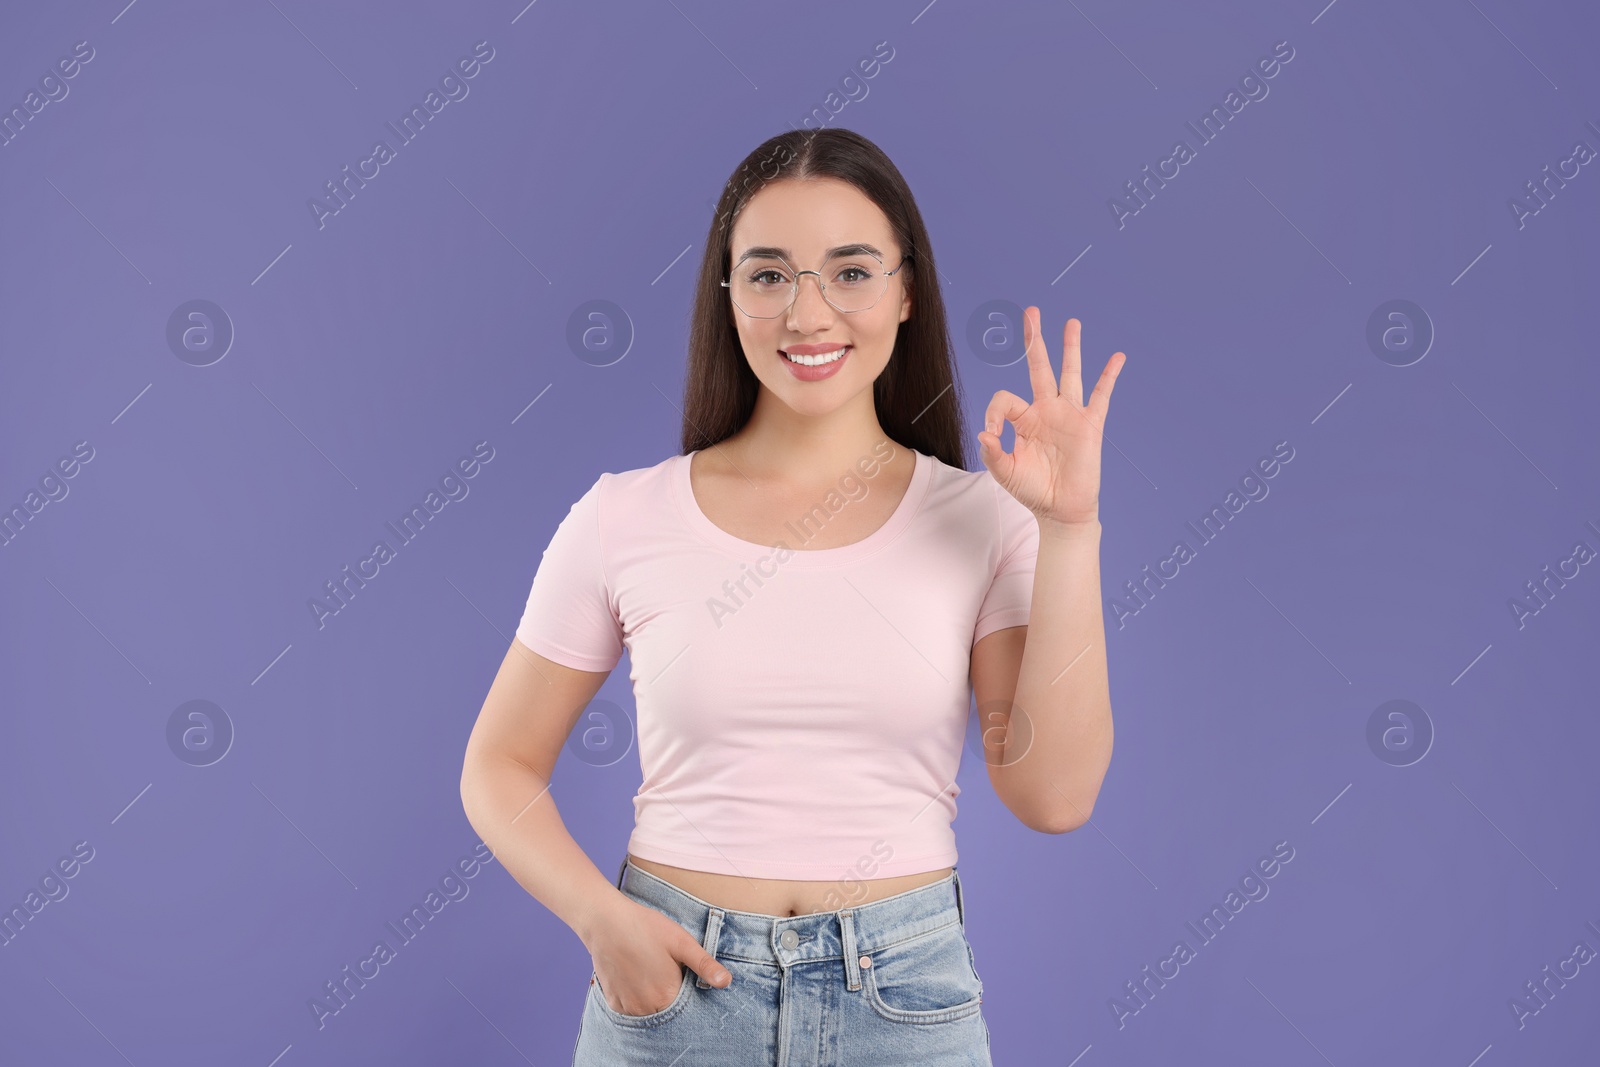 Photo of Beautiful woman in glasses showing OK gesture on violet background